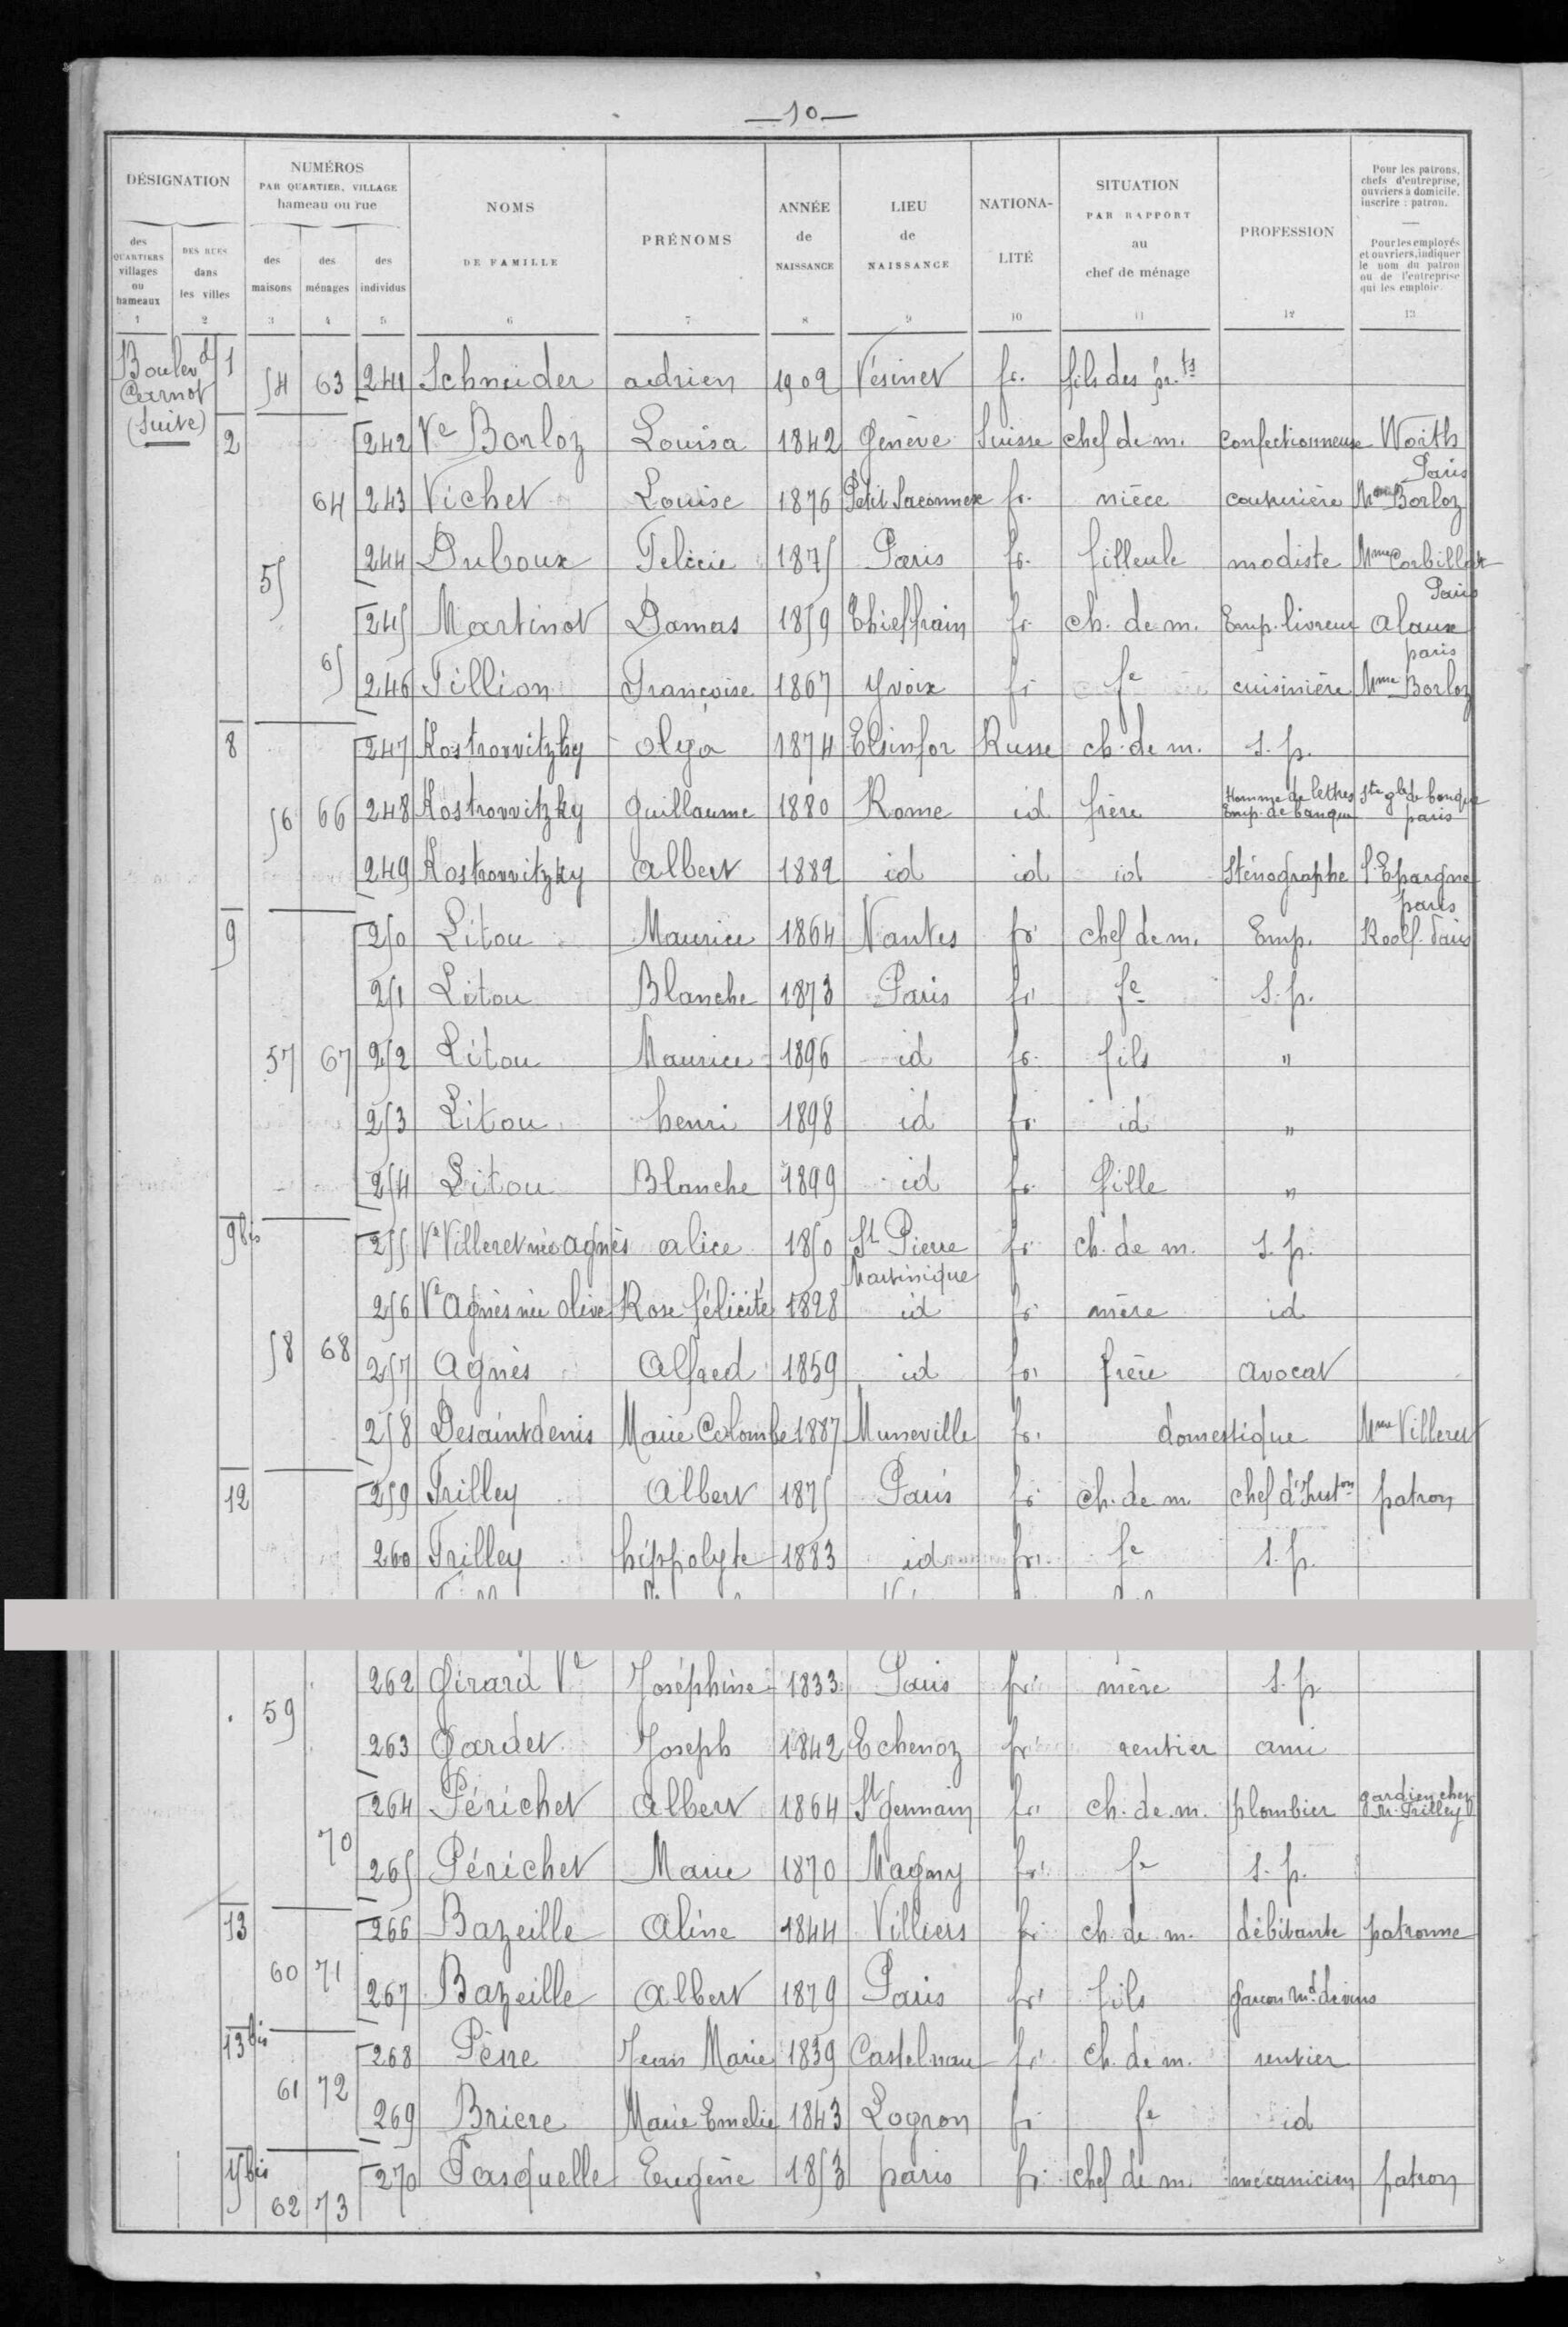 entry for the esteemed poet and art critic Guillaume Apollinaire in the 1906 France Census